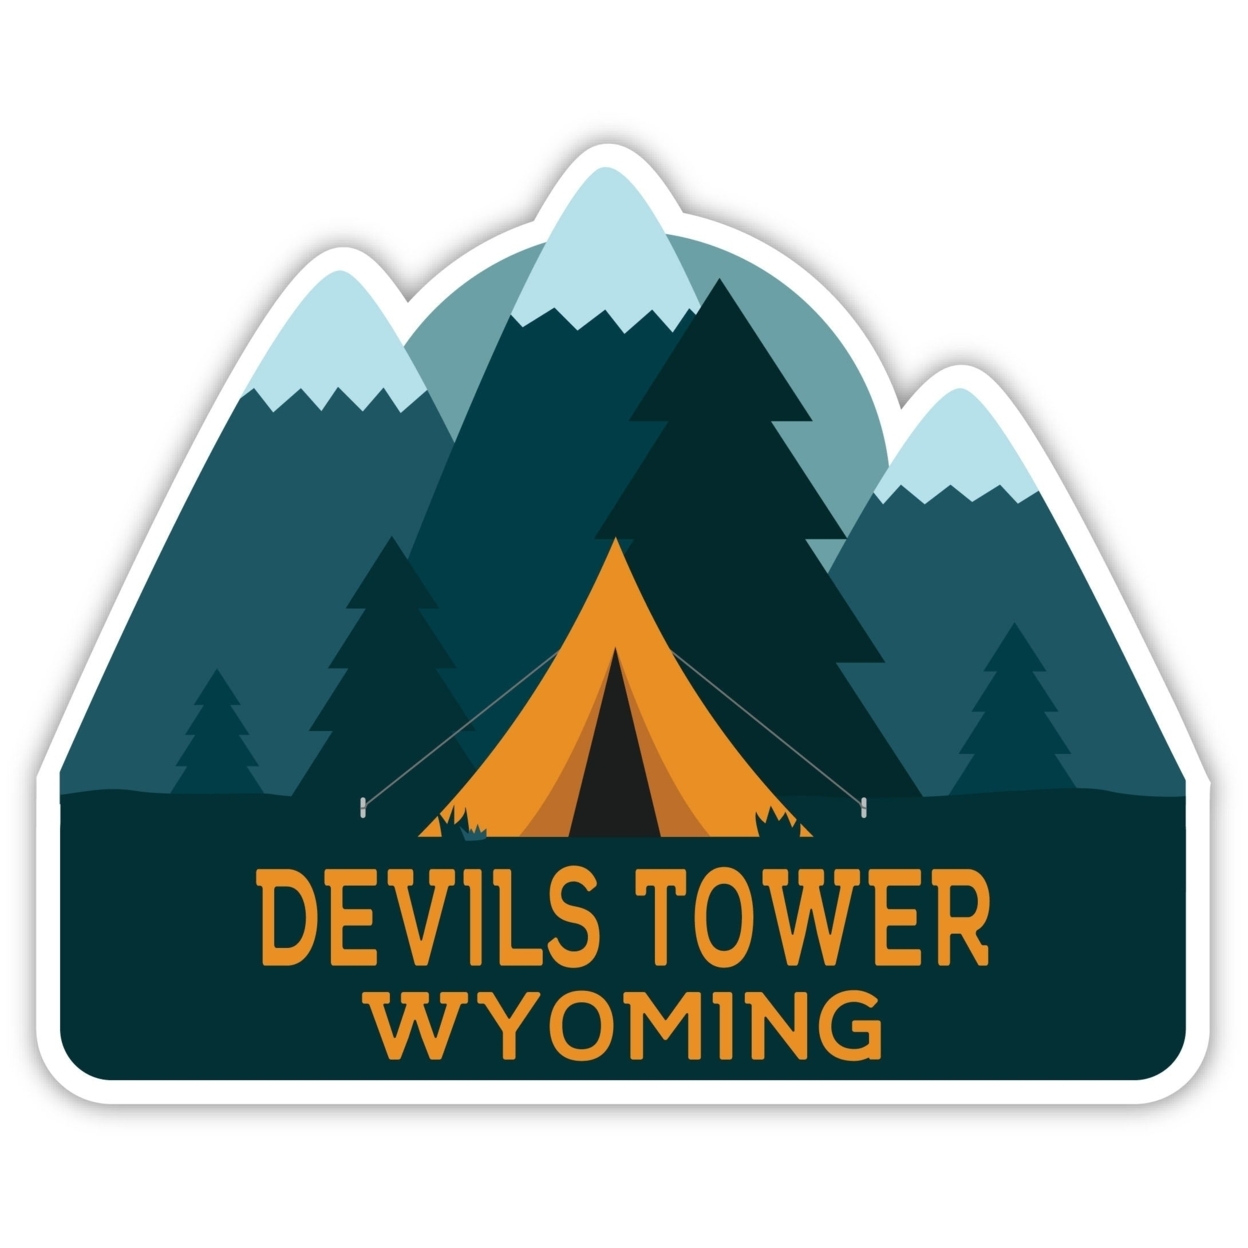 Devils Tower Wyoming Souvenir Decorative Stickers (Choose Theme And Size) - 4-Pack, 2-Inch, Tent